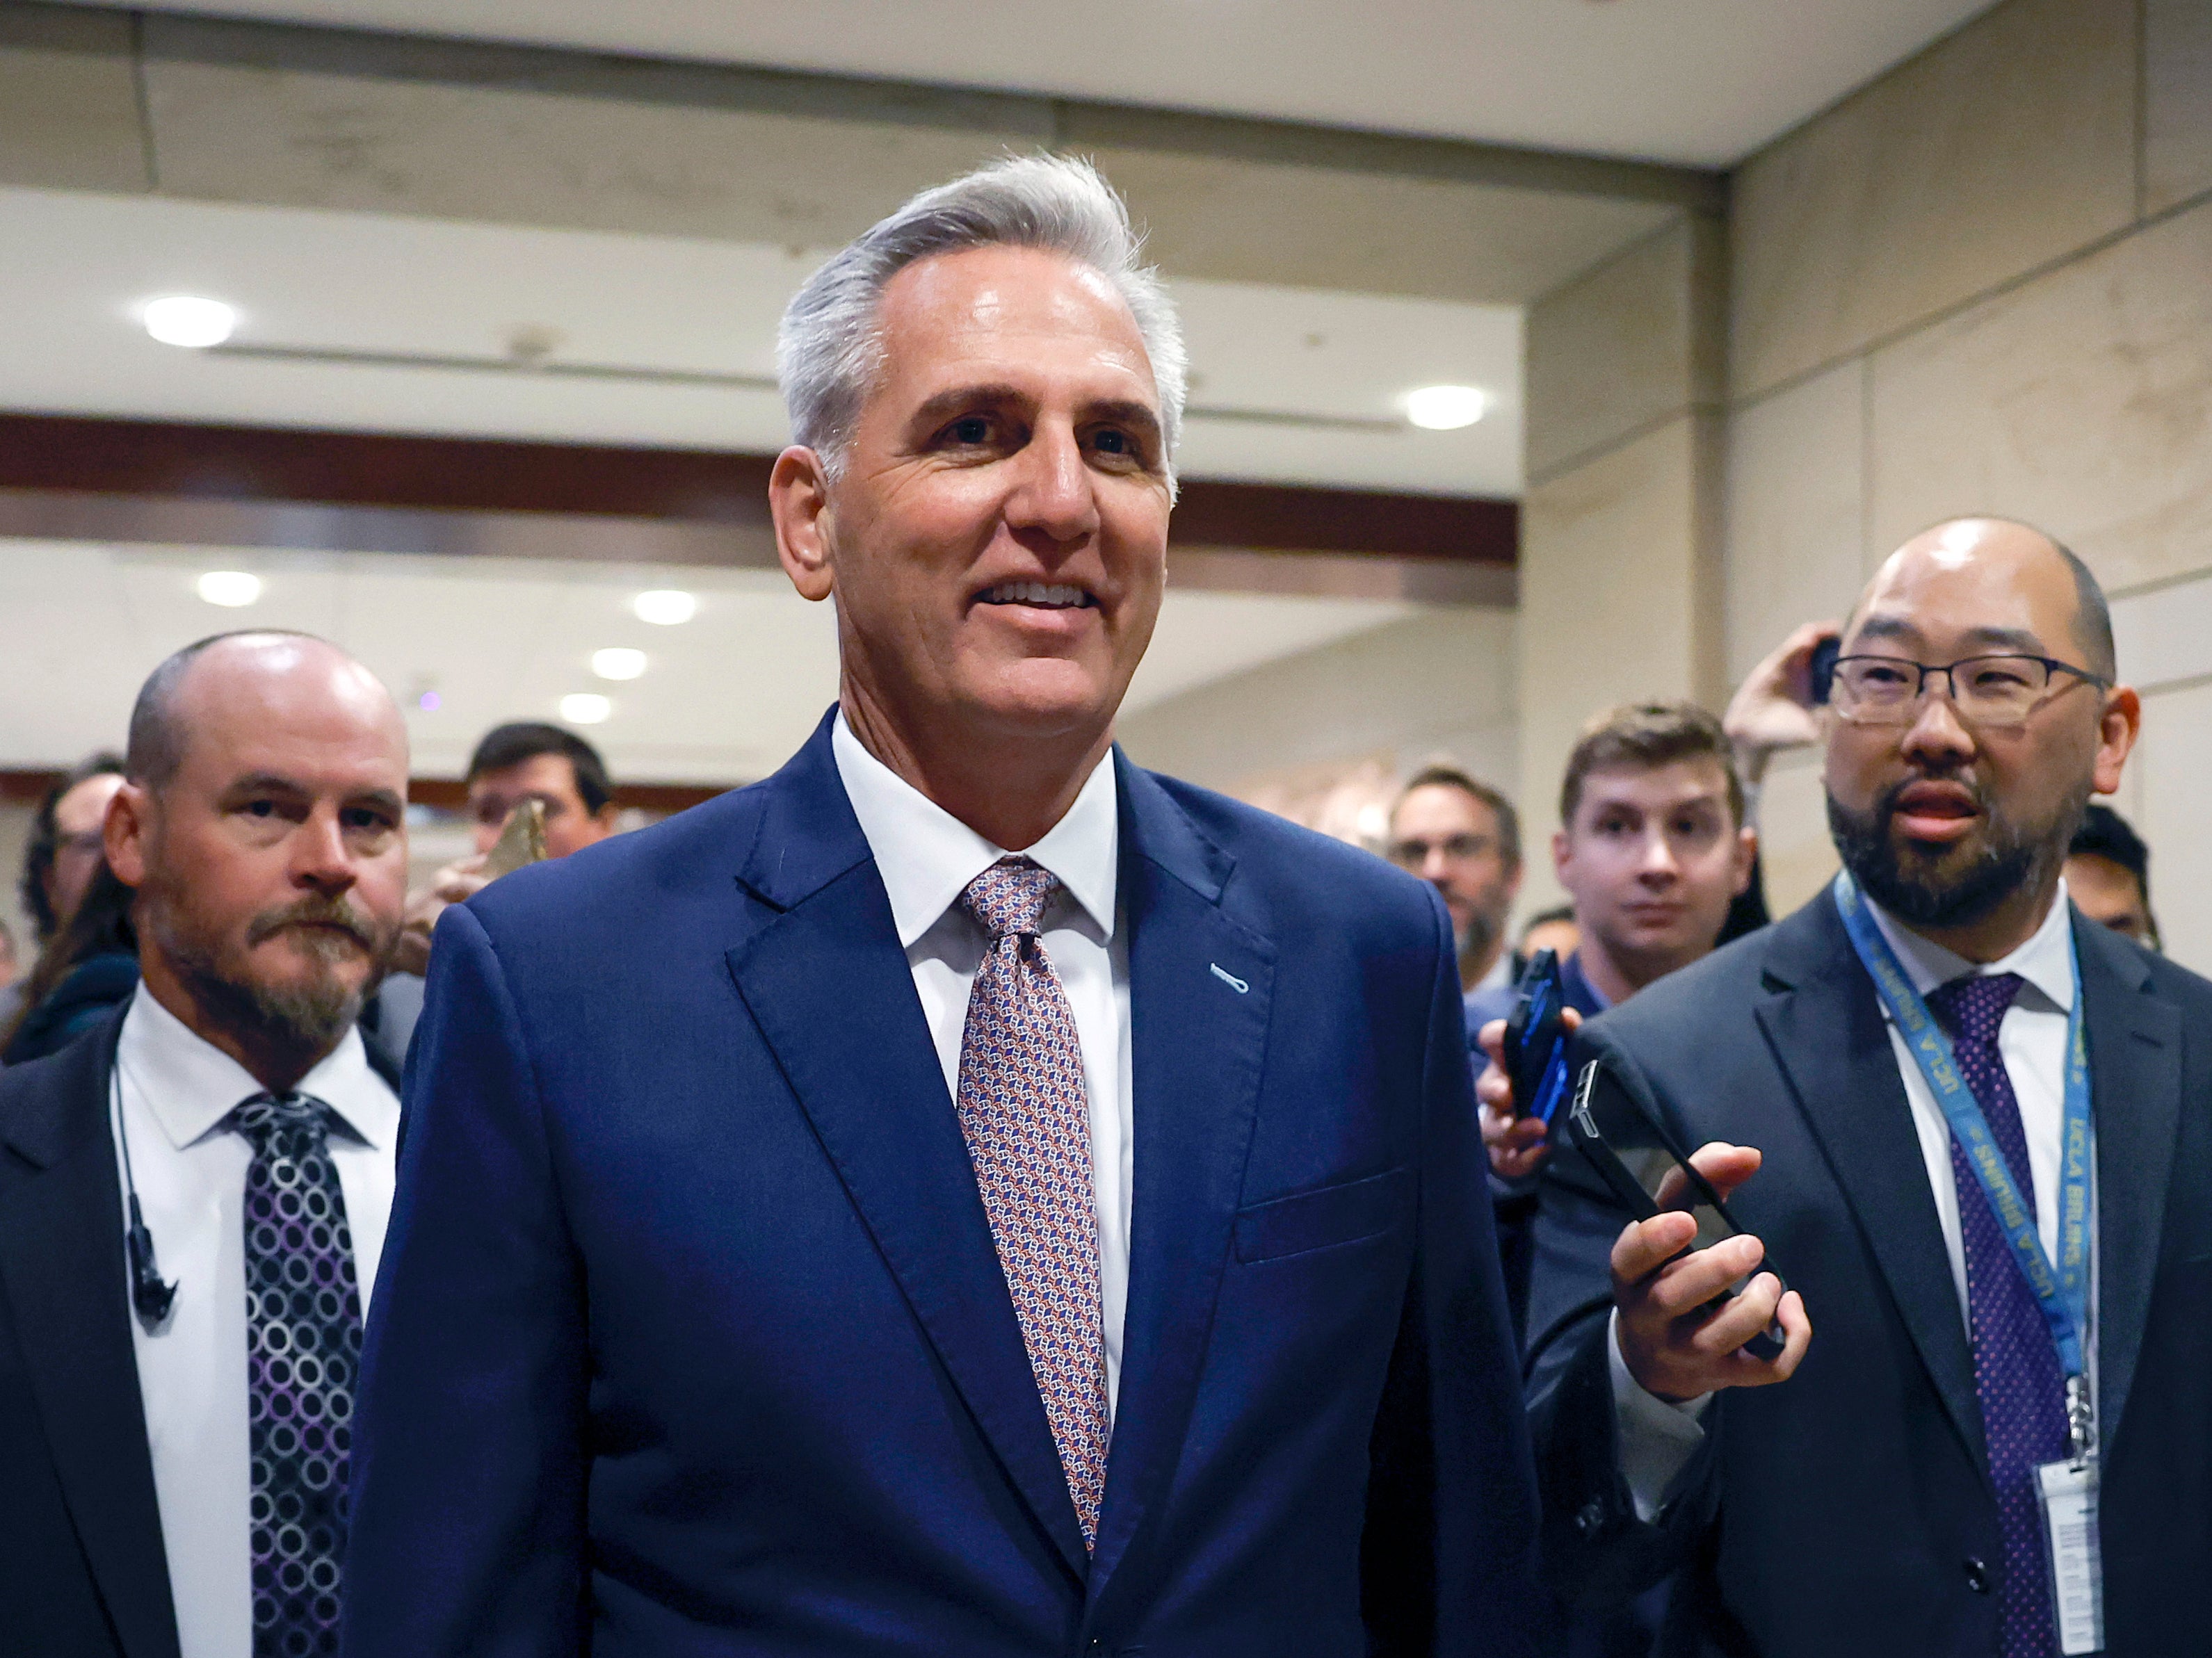 House Minority Leader Kevin McCarthy (R-CA) is followed by reporters as he arrives to a House Republican Caucus meeting at the U.S. Capitol Building on November 14, 2022 in Washington, DC